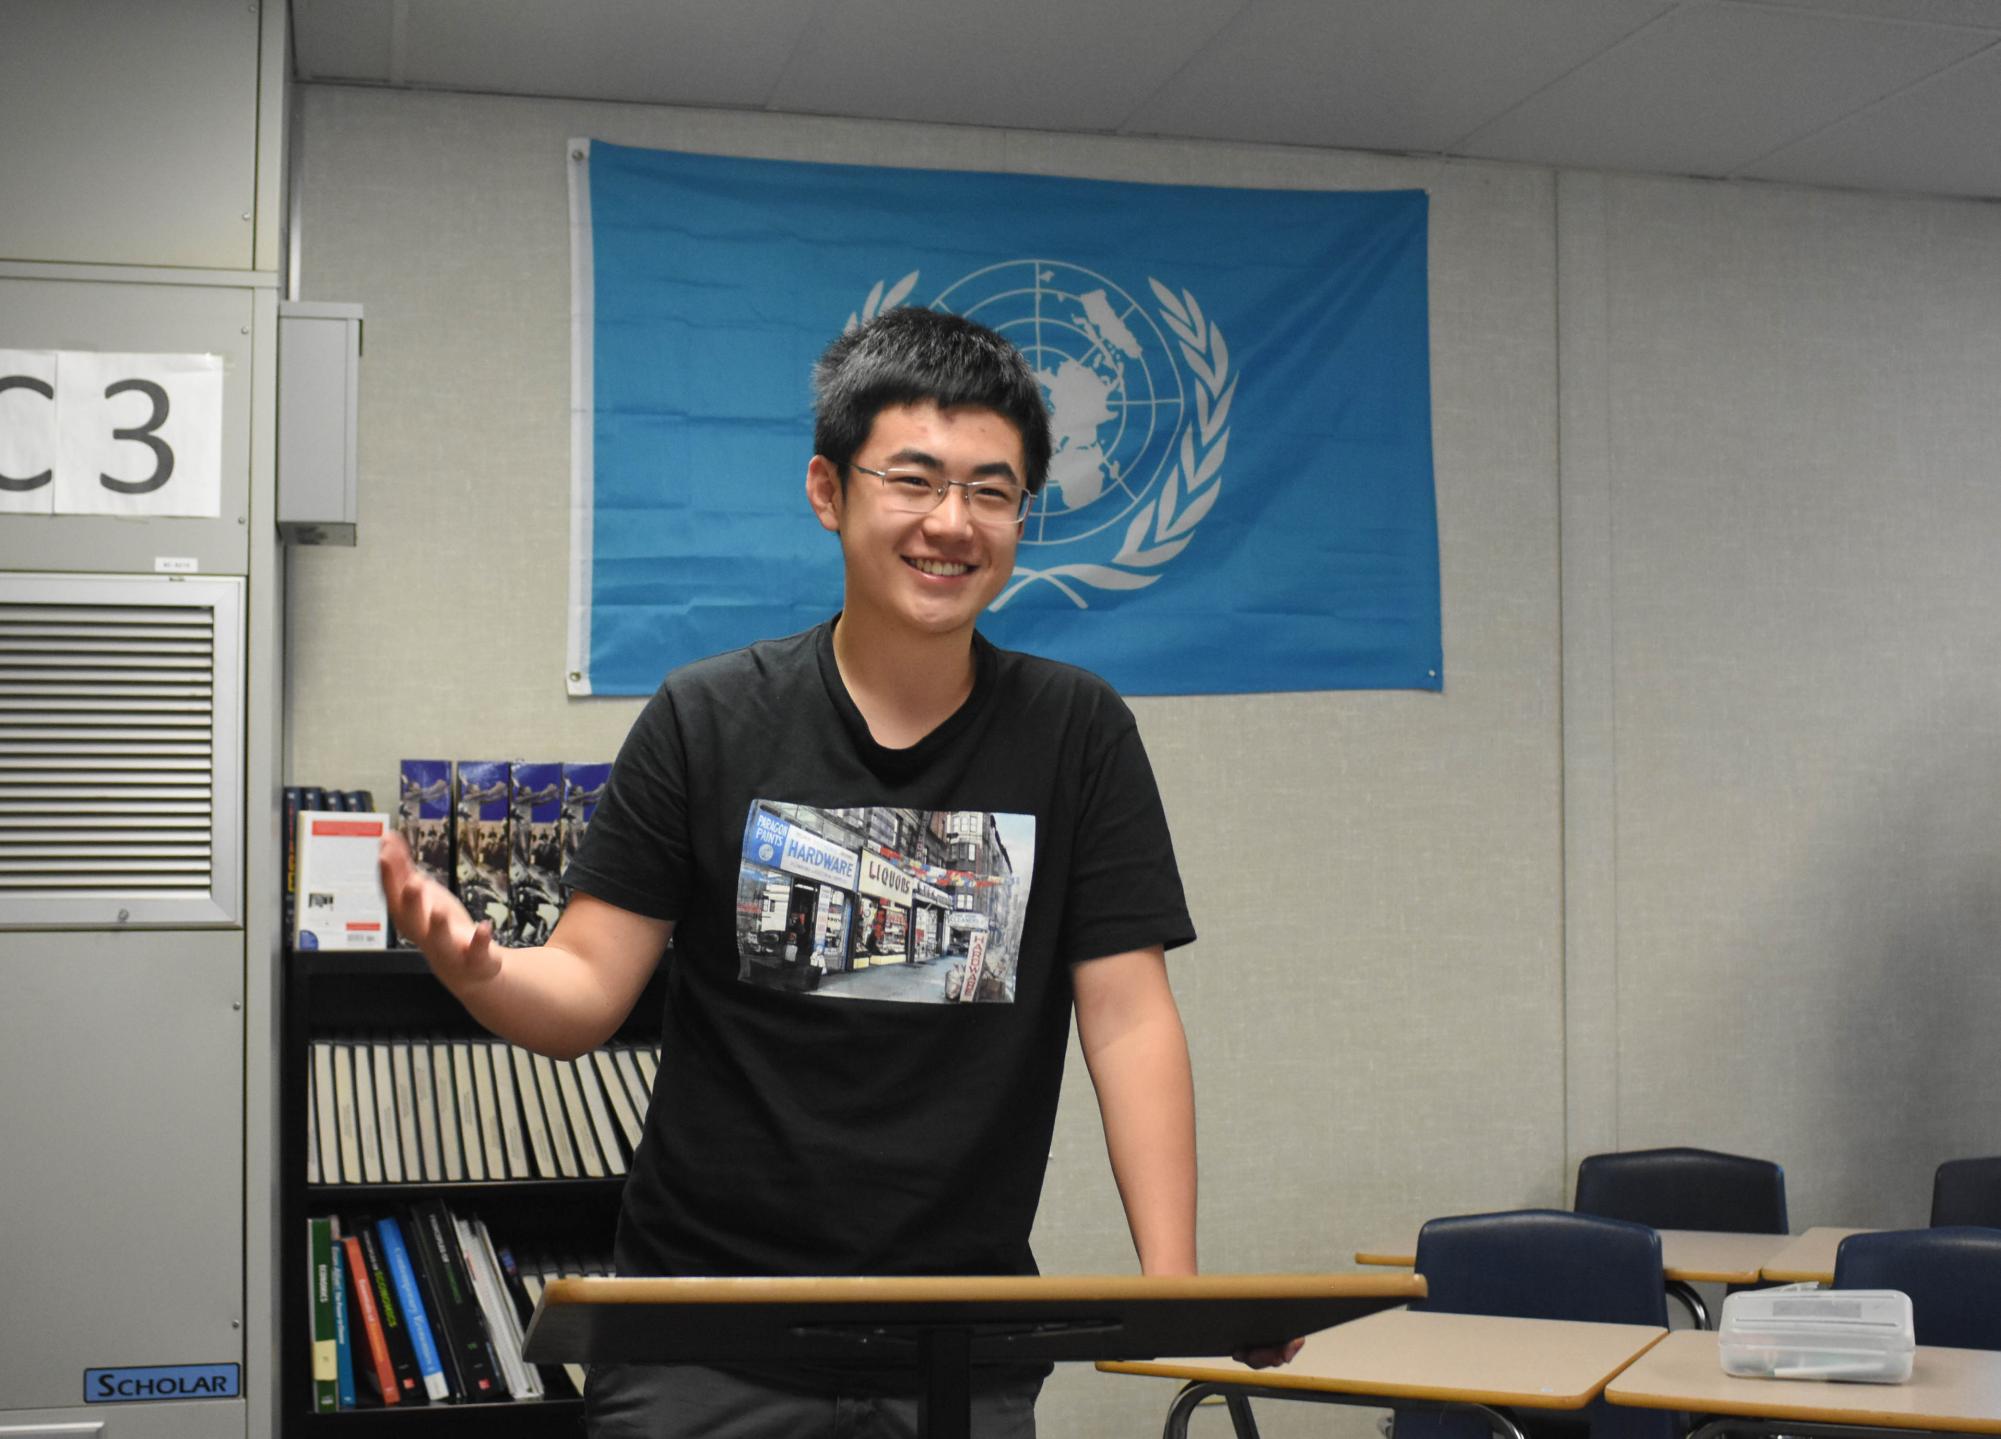 Model United Nations student George Zhe Wang (12), giving his argument towards real world issues. Students participate in debates and give their opinions on different topics and from the perspective of the country they represent.